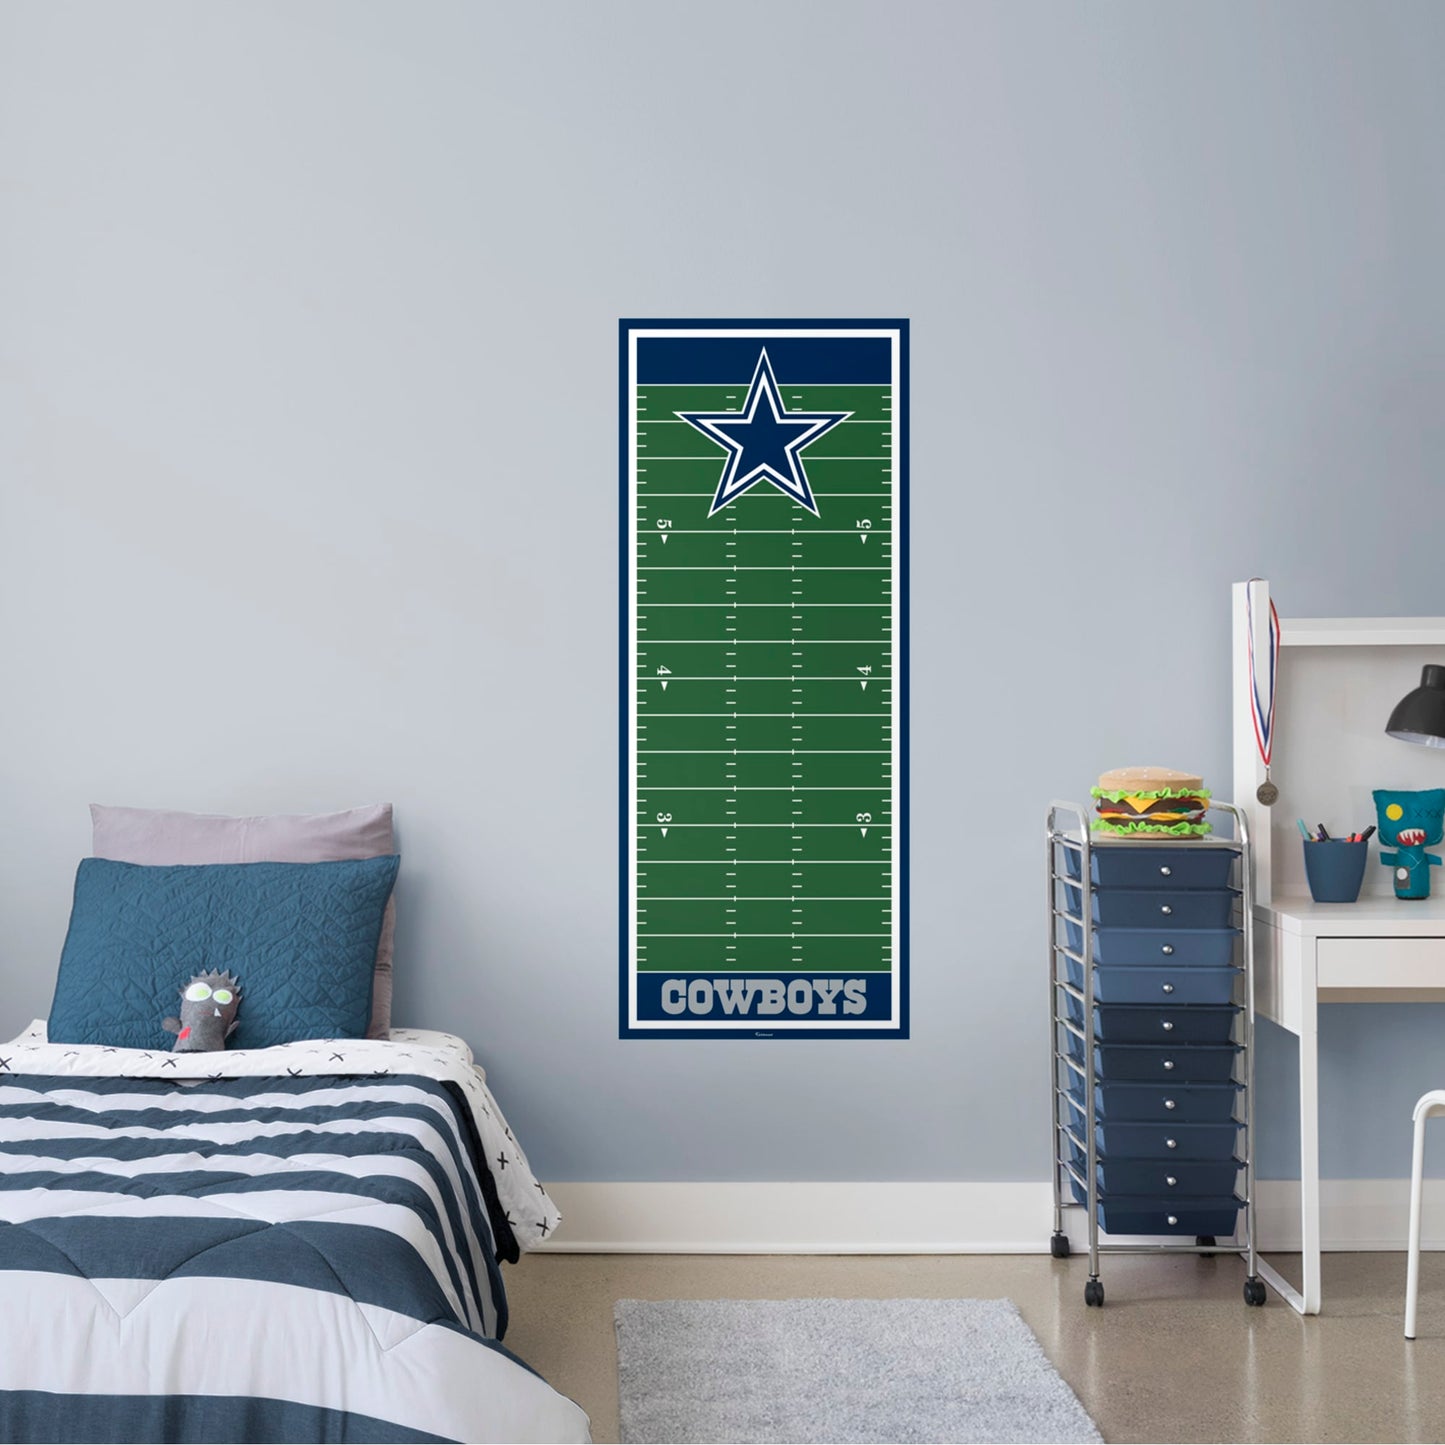 Dallas Cowboys: Growth Chart - Officially Licensed NFL Removable Wall Graphic